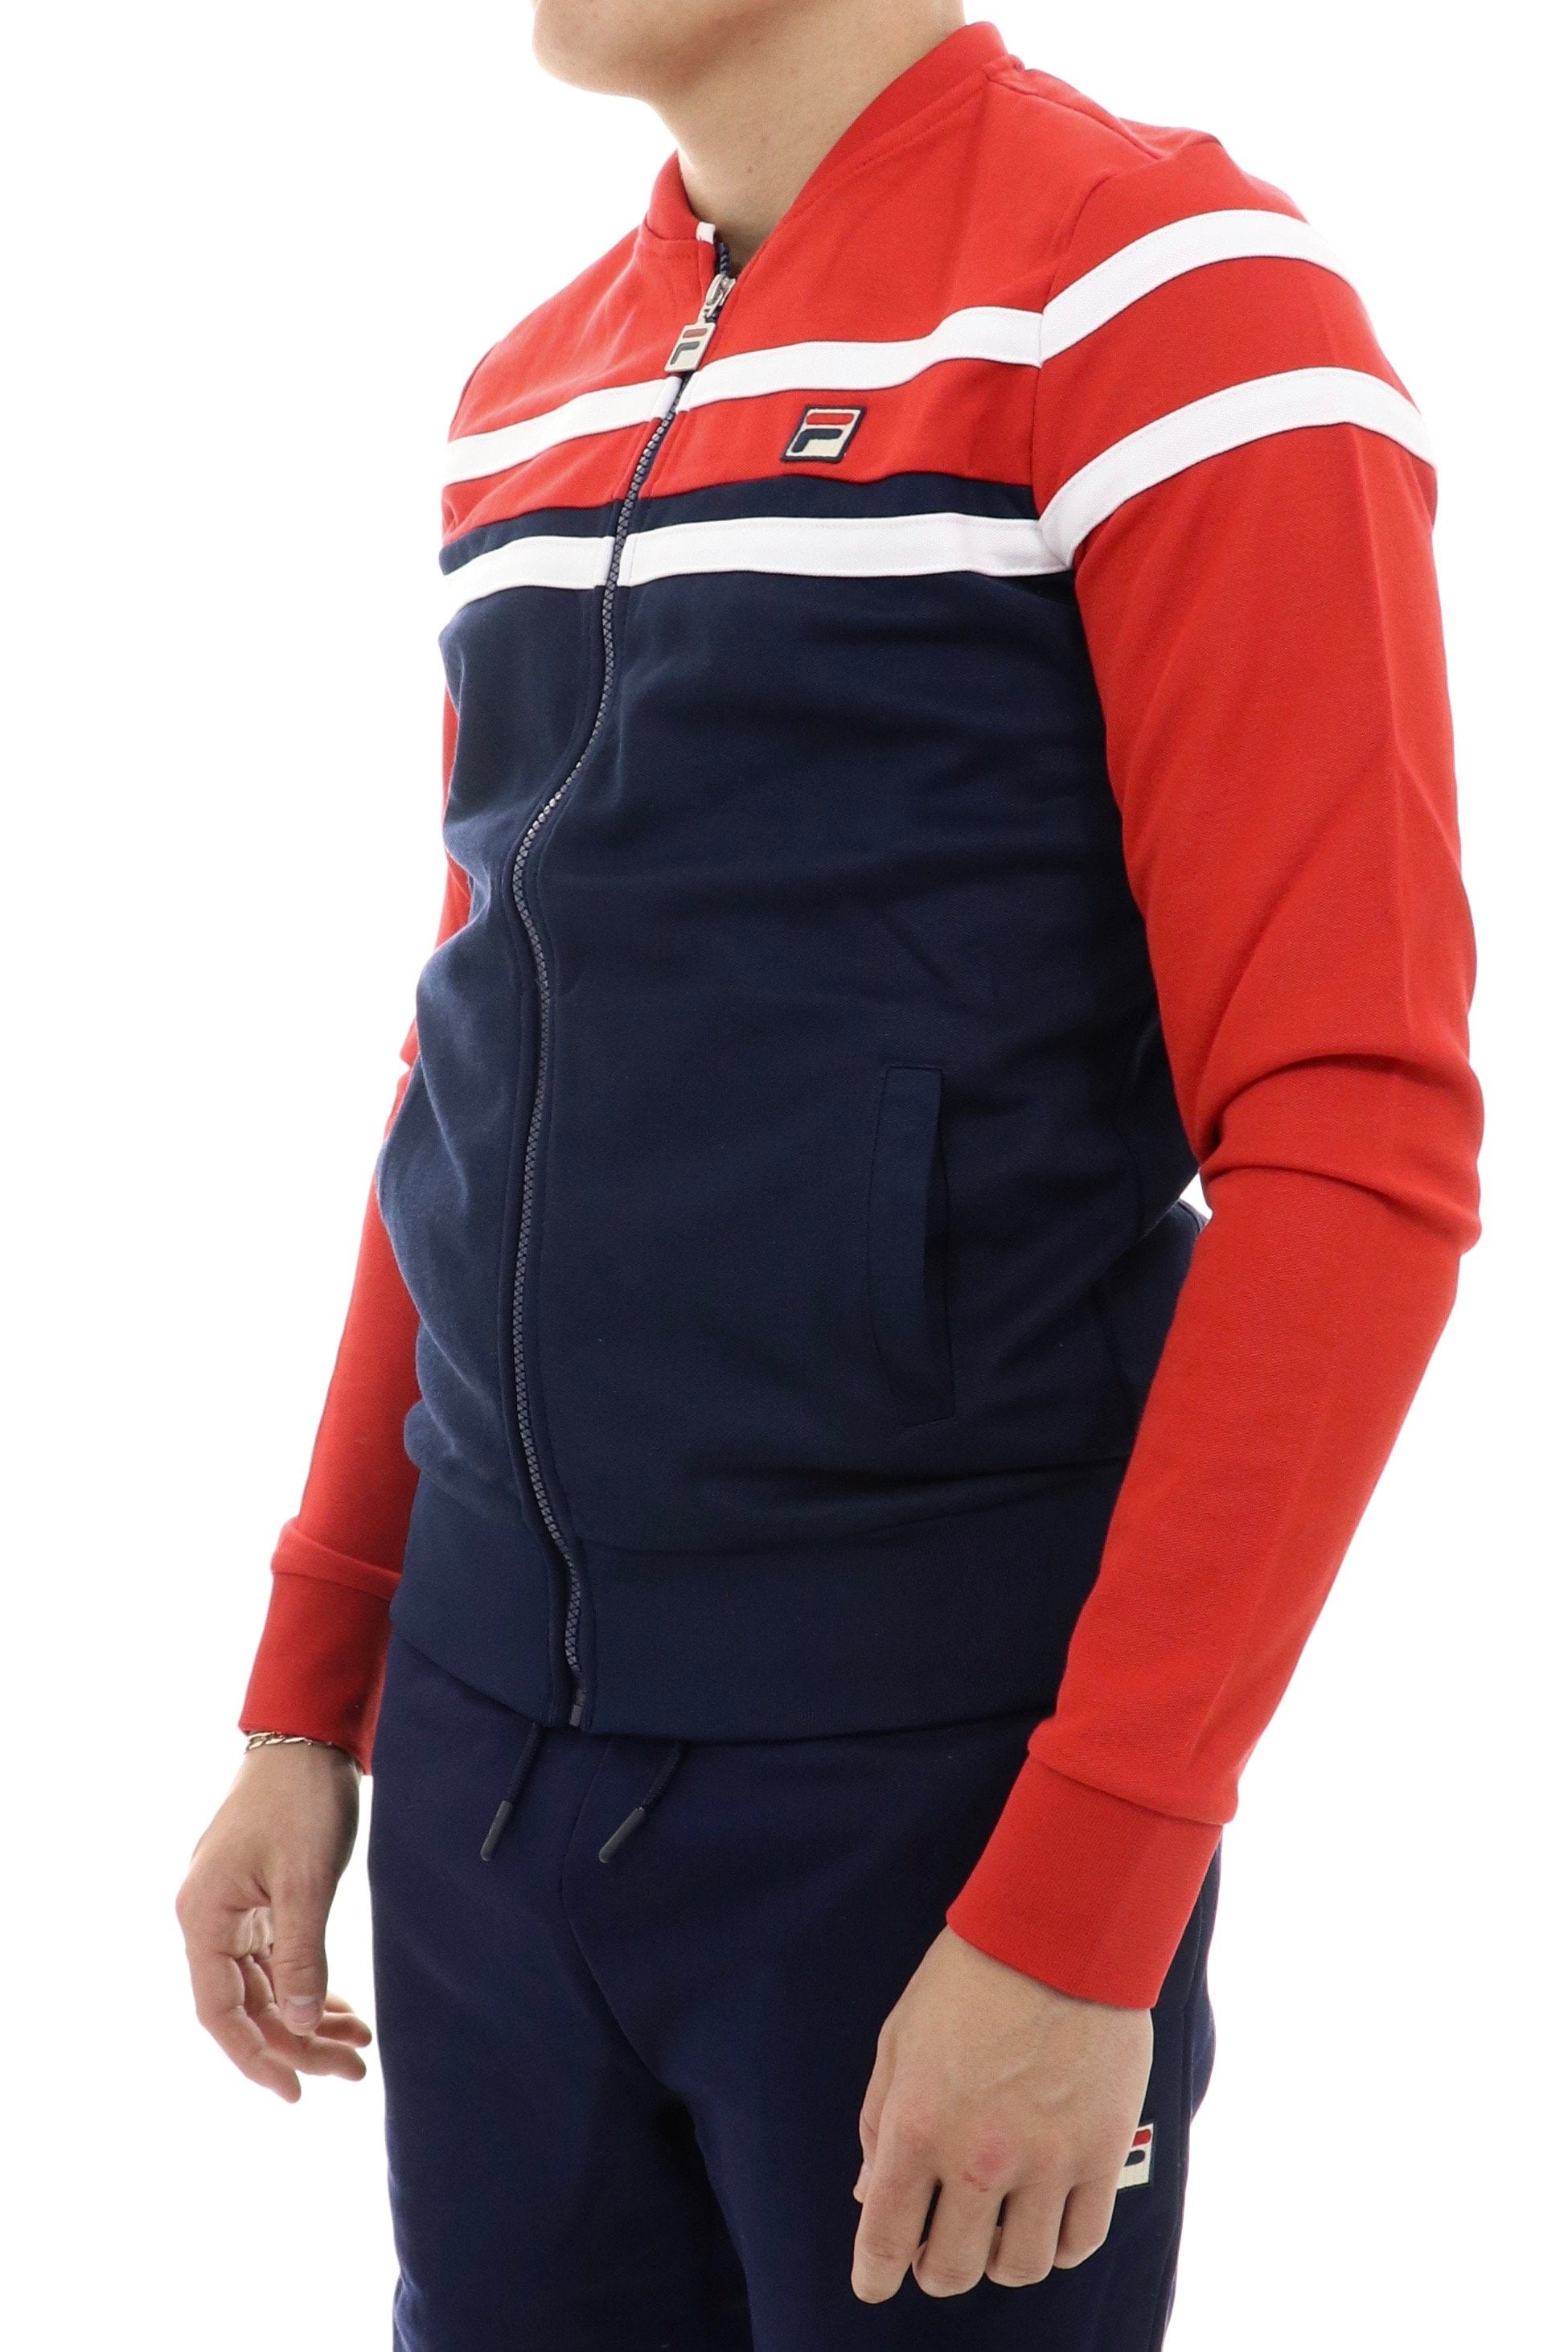 fila red white and blue jacket